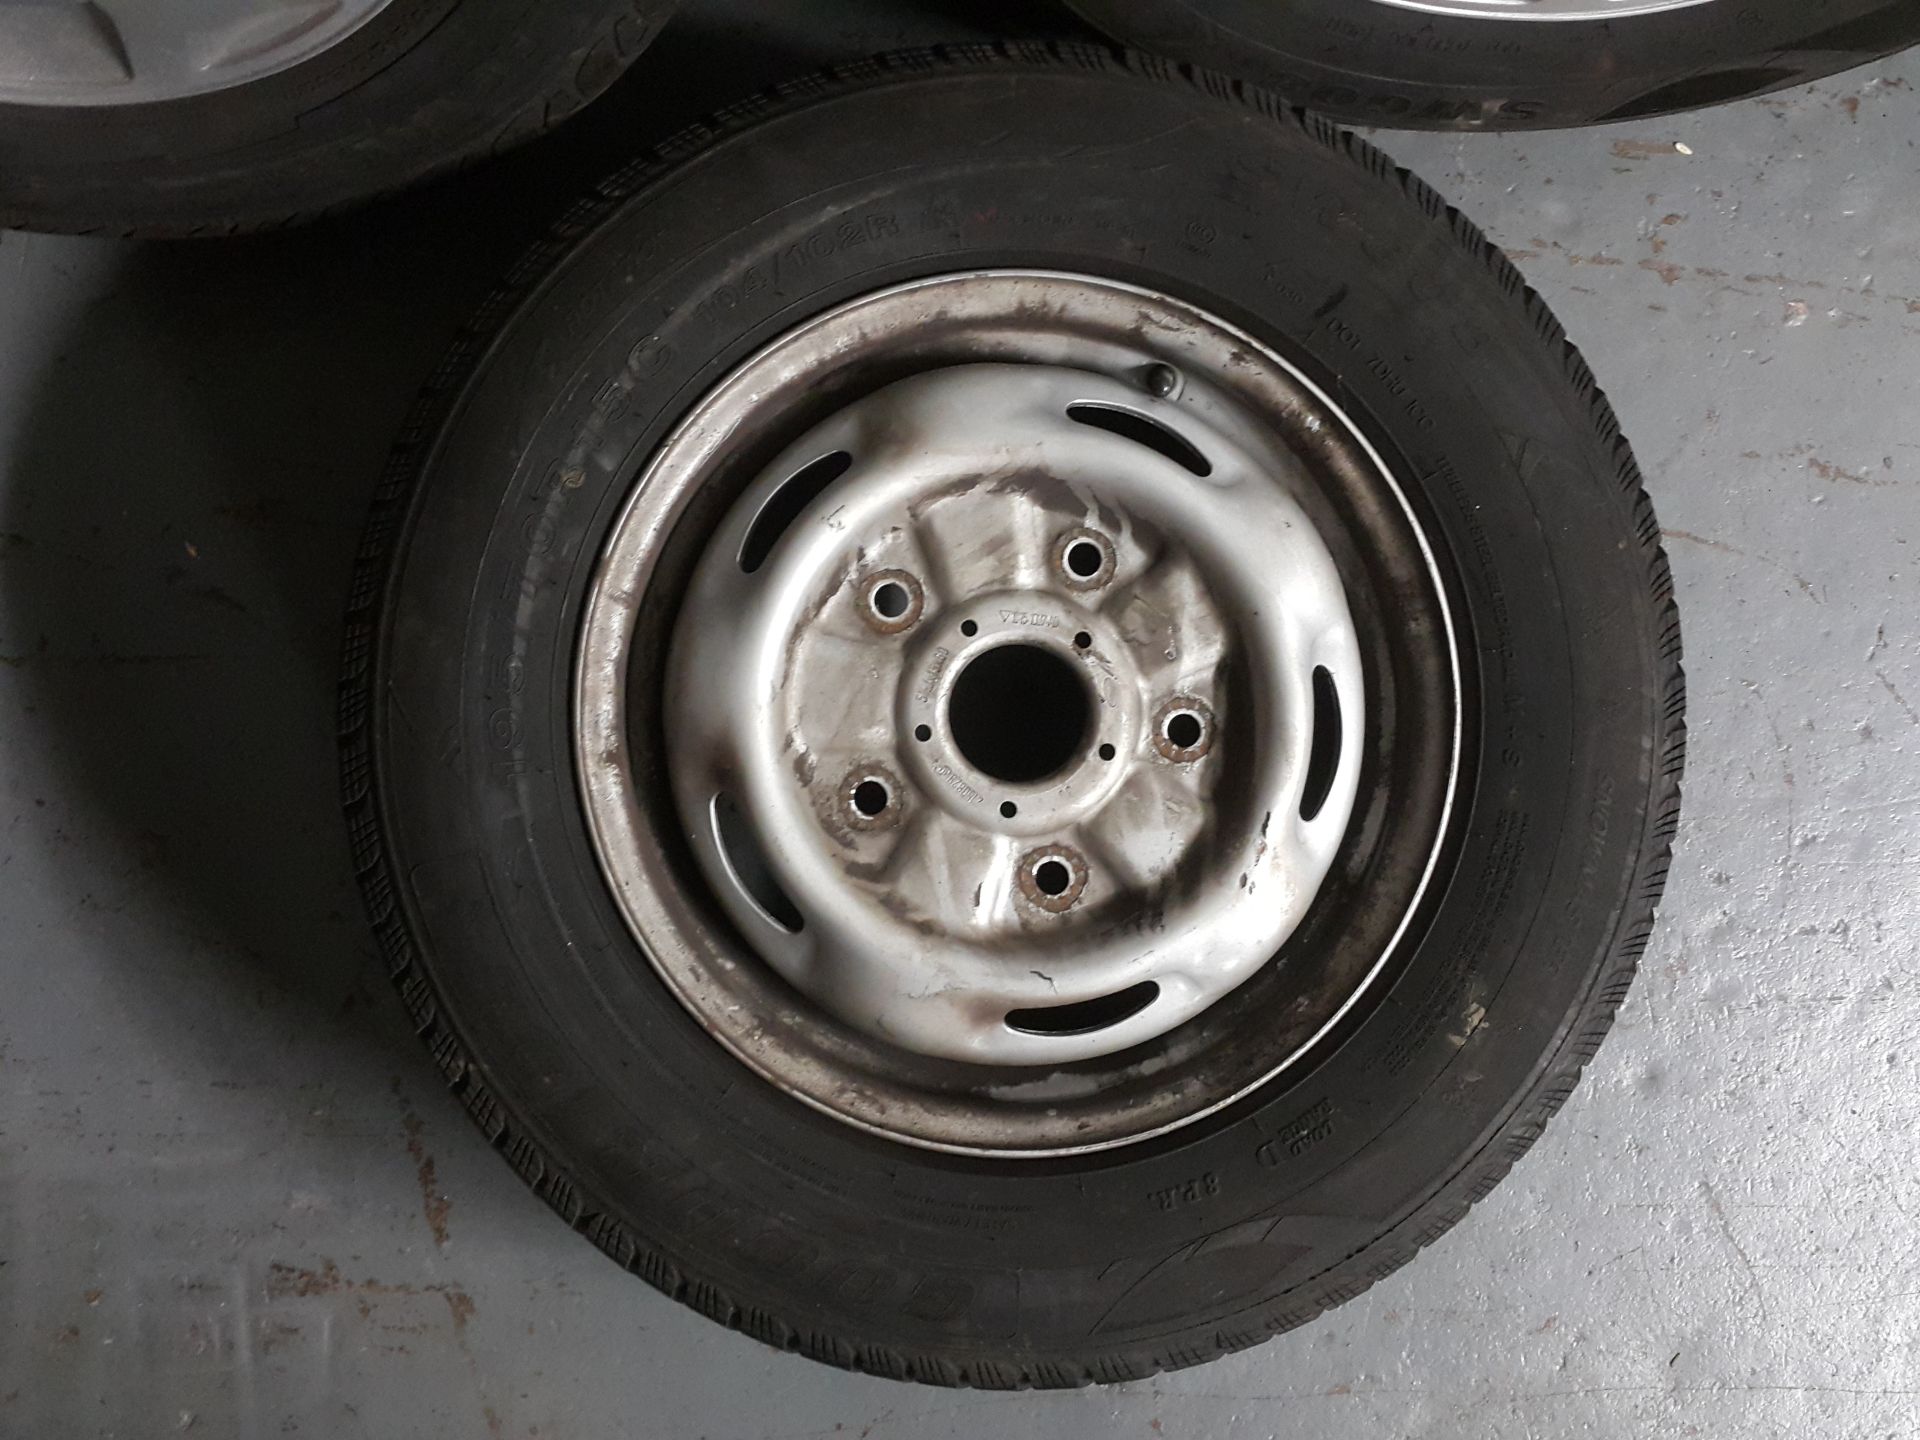 4 X FORD TRANSIT 15" STEEL RIMS WITH TYRES 195/70/R15 (2 UNIROYAL 2 OTHERS) - Image 8 of 9